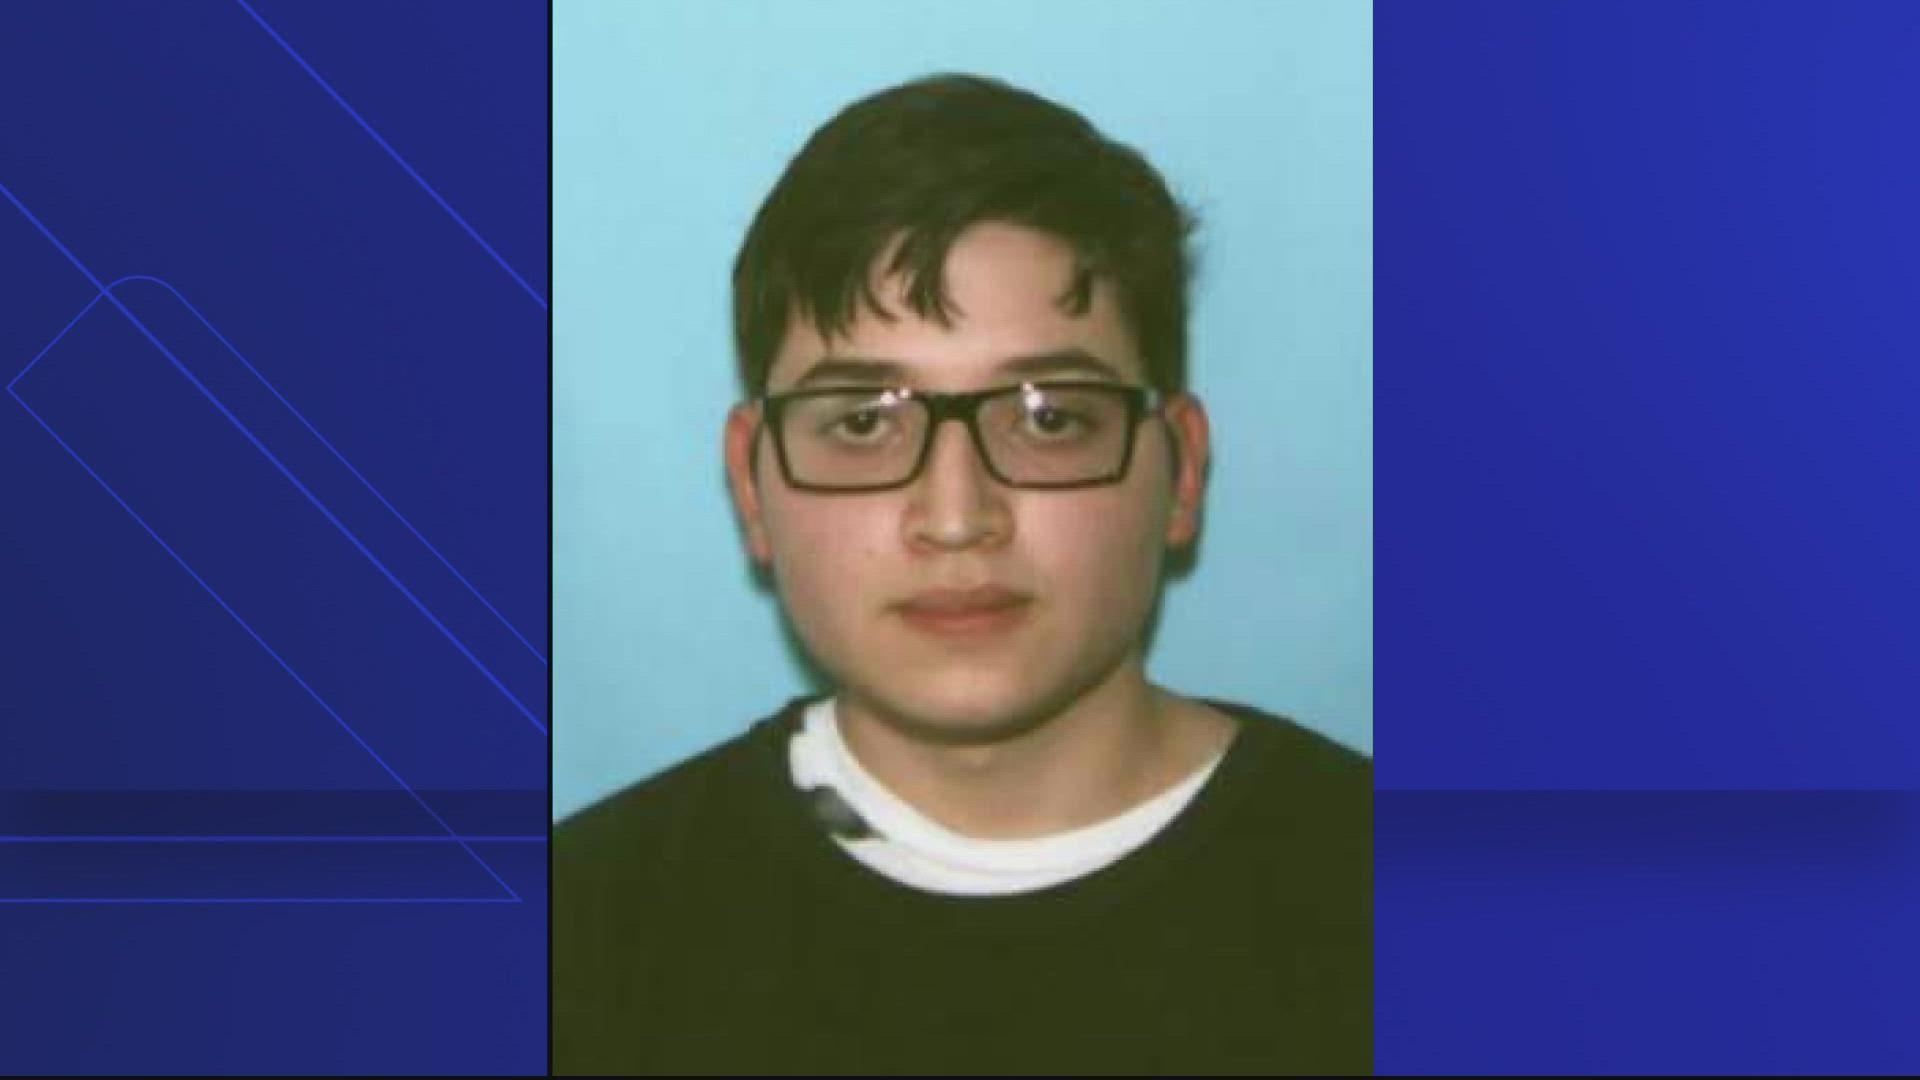 Joe Esquivel, a 23-year-old from West Virginia allegedly killed three co-workers and injured one on June 9 during a shooting at a manufacturing plant in Smithsburg.